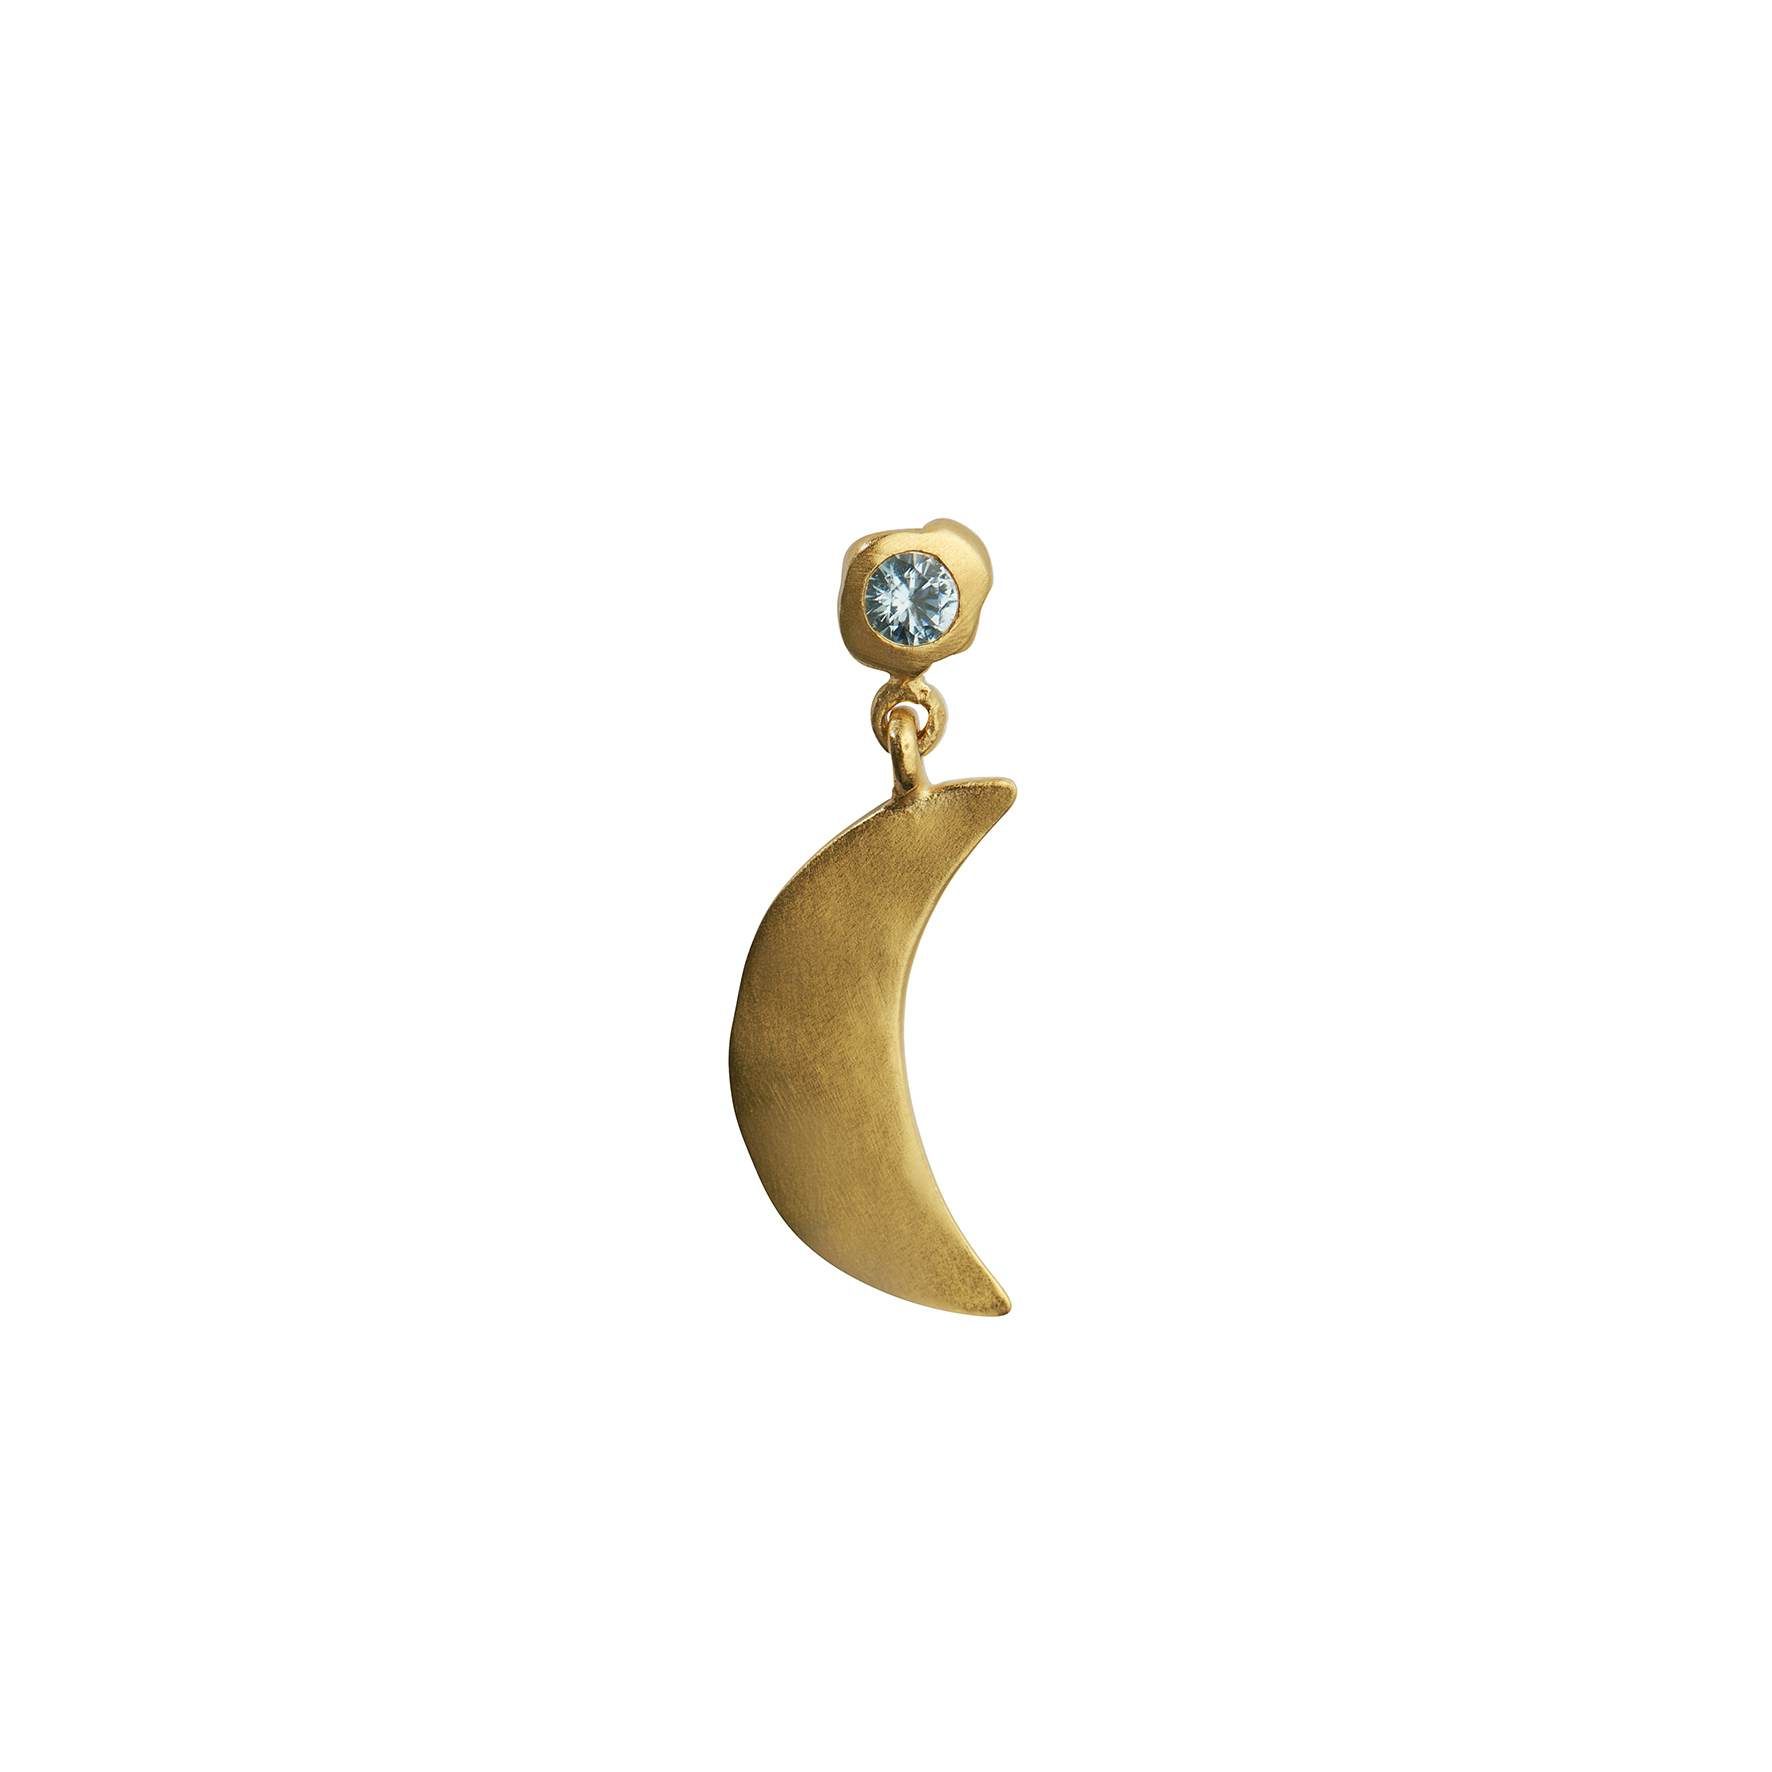 Big Dot Bella Moon with Blue Lagune Stone from STINE A Jewelry in Goldplated-Silver Sterling 925